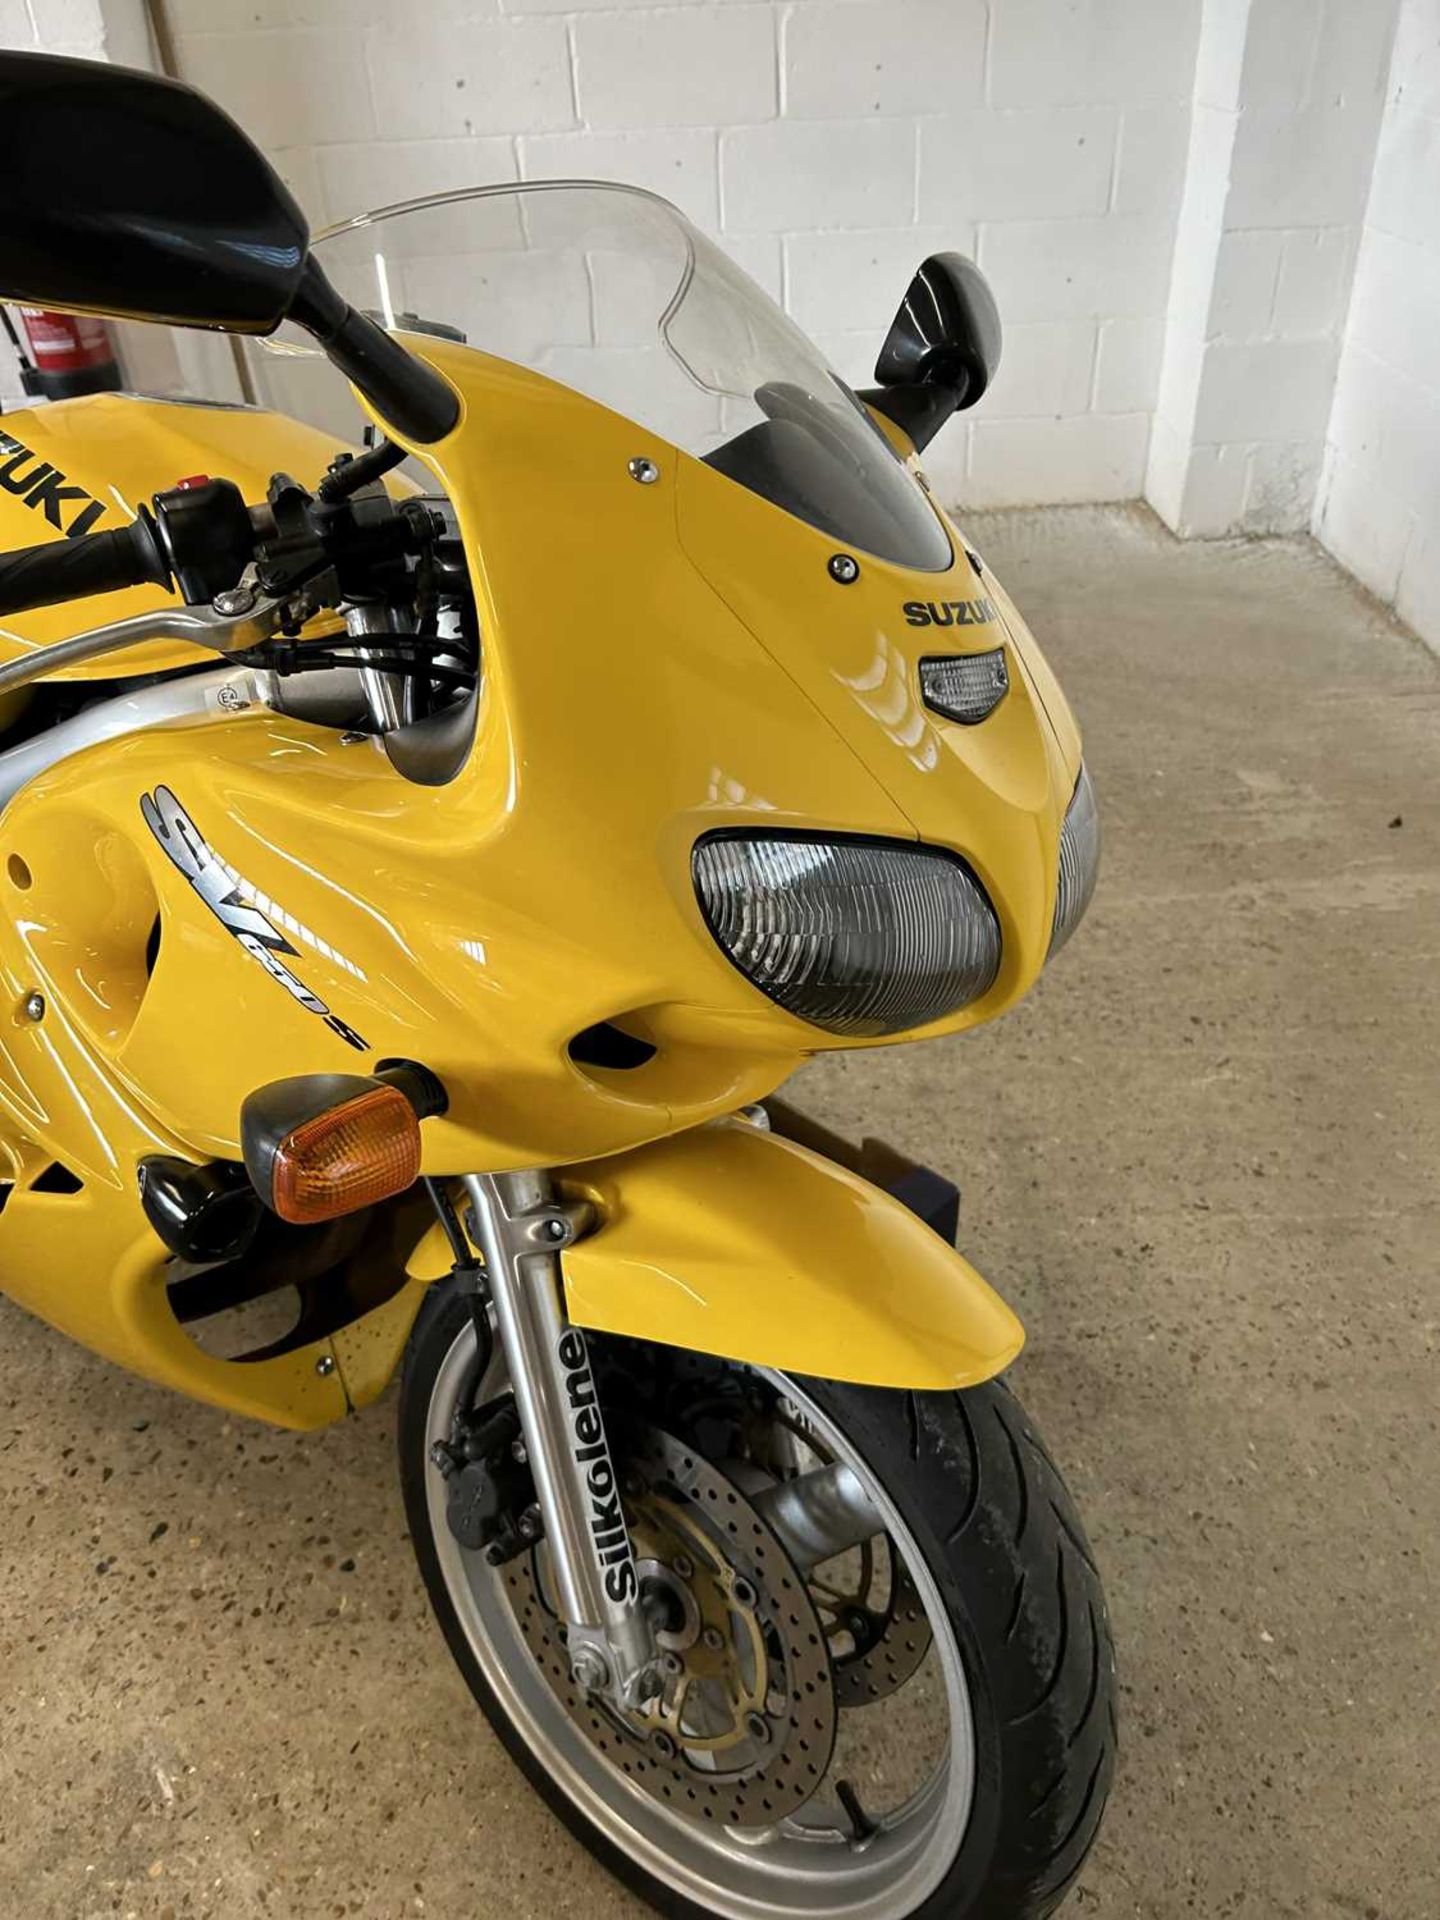 Suzuki SV650s in excellent condition, 10,000 miles, current MOT expires 24.05.2024, only 2 owners - Image 7 of 11